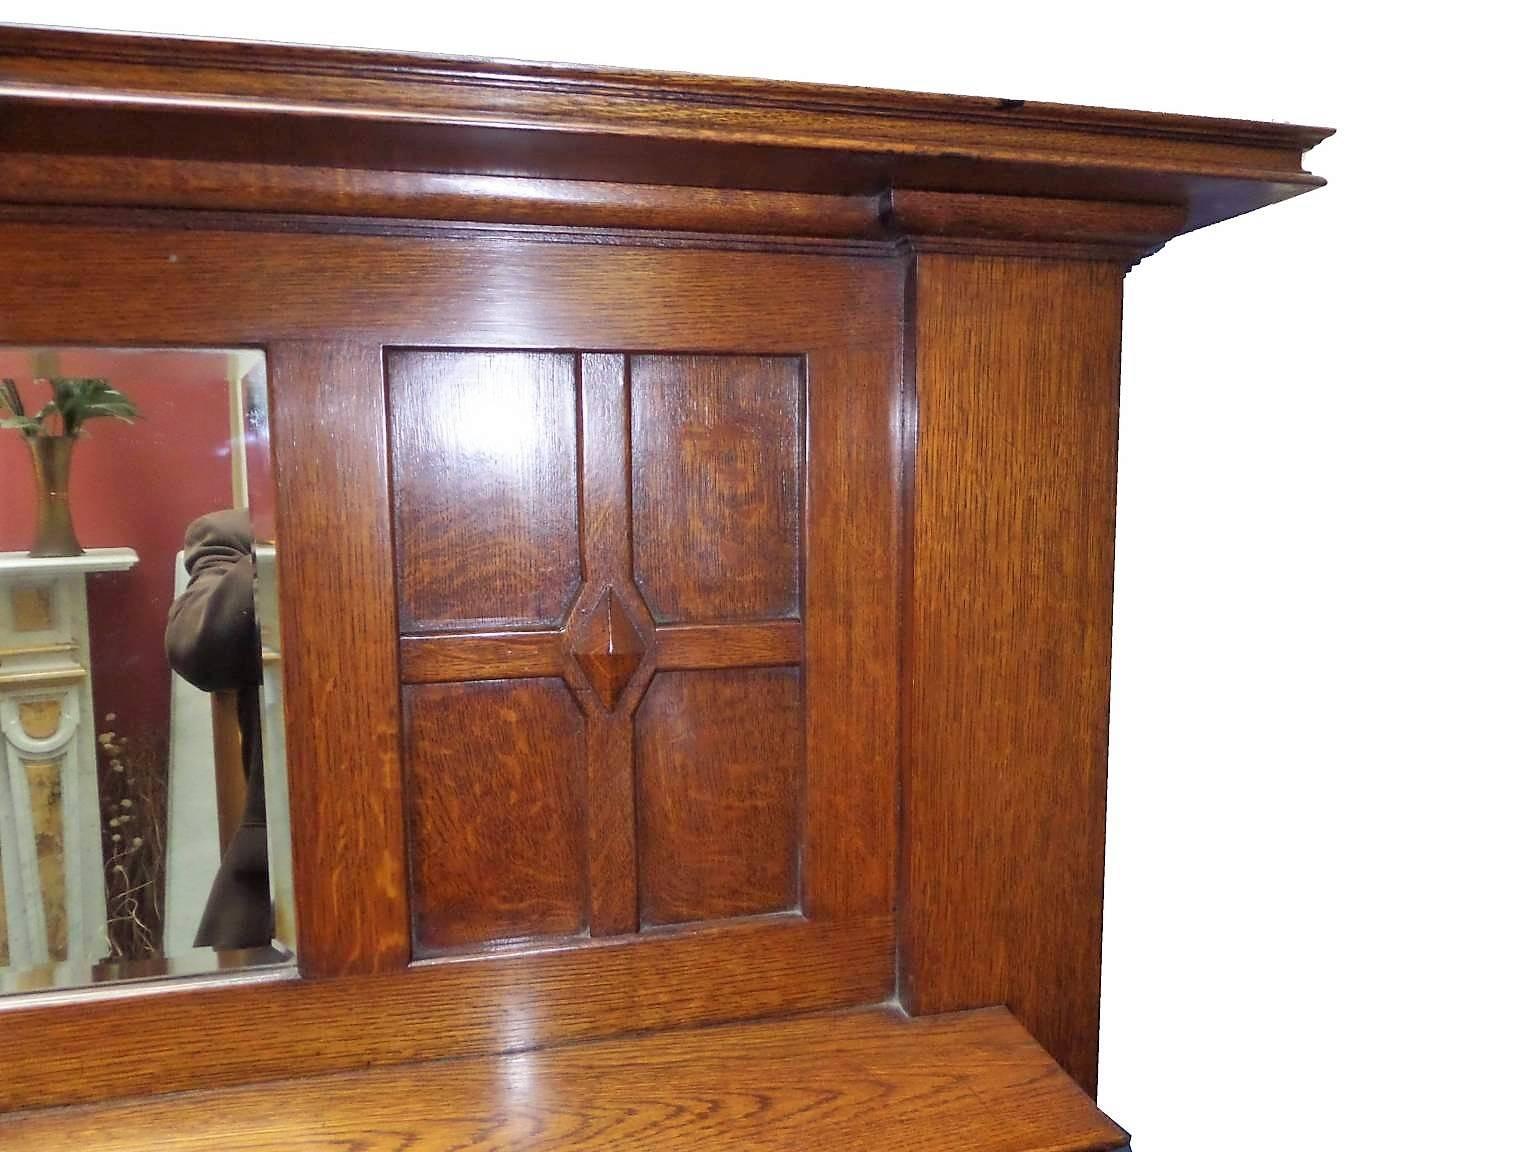 Antique restored Edwardian Arts and Crafts oakwood mantel or surround and mirror, circa 1910. Panelled design typical of the arts and craft period along with original mirror.